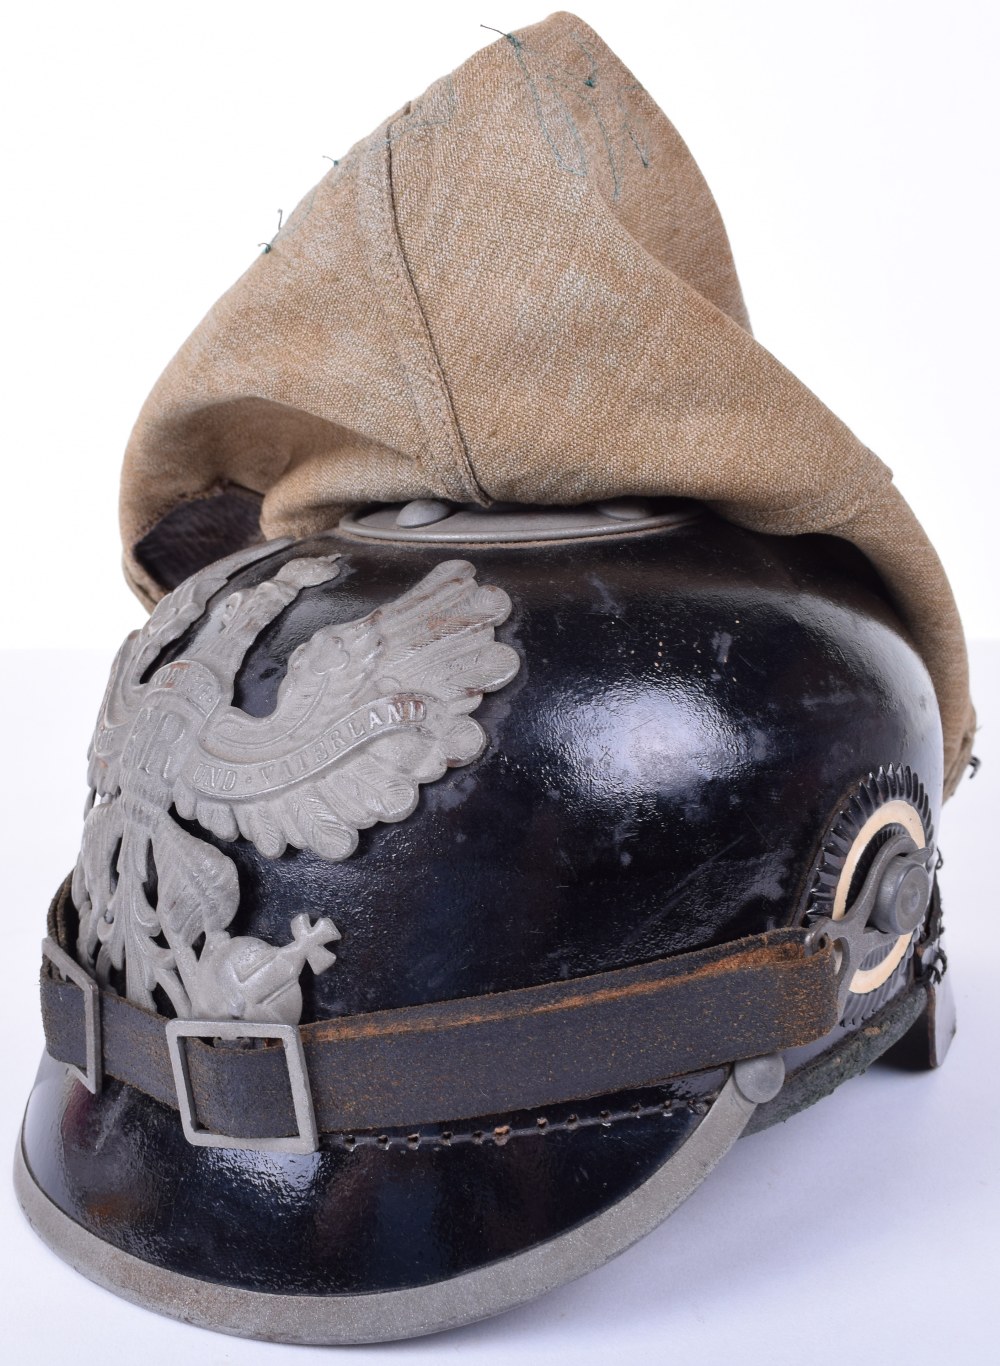 Prussian Other Ranks Pickelhaube with Original Trench Cover - Image 8 of 19